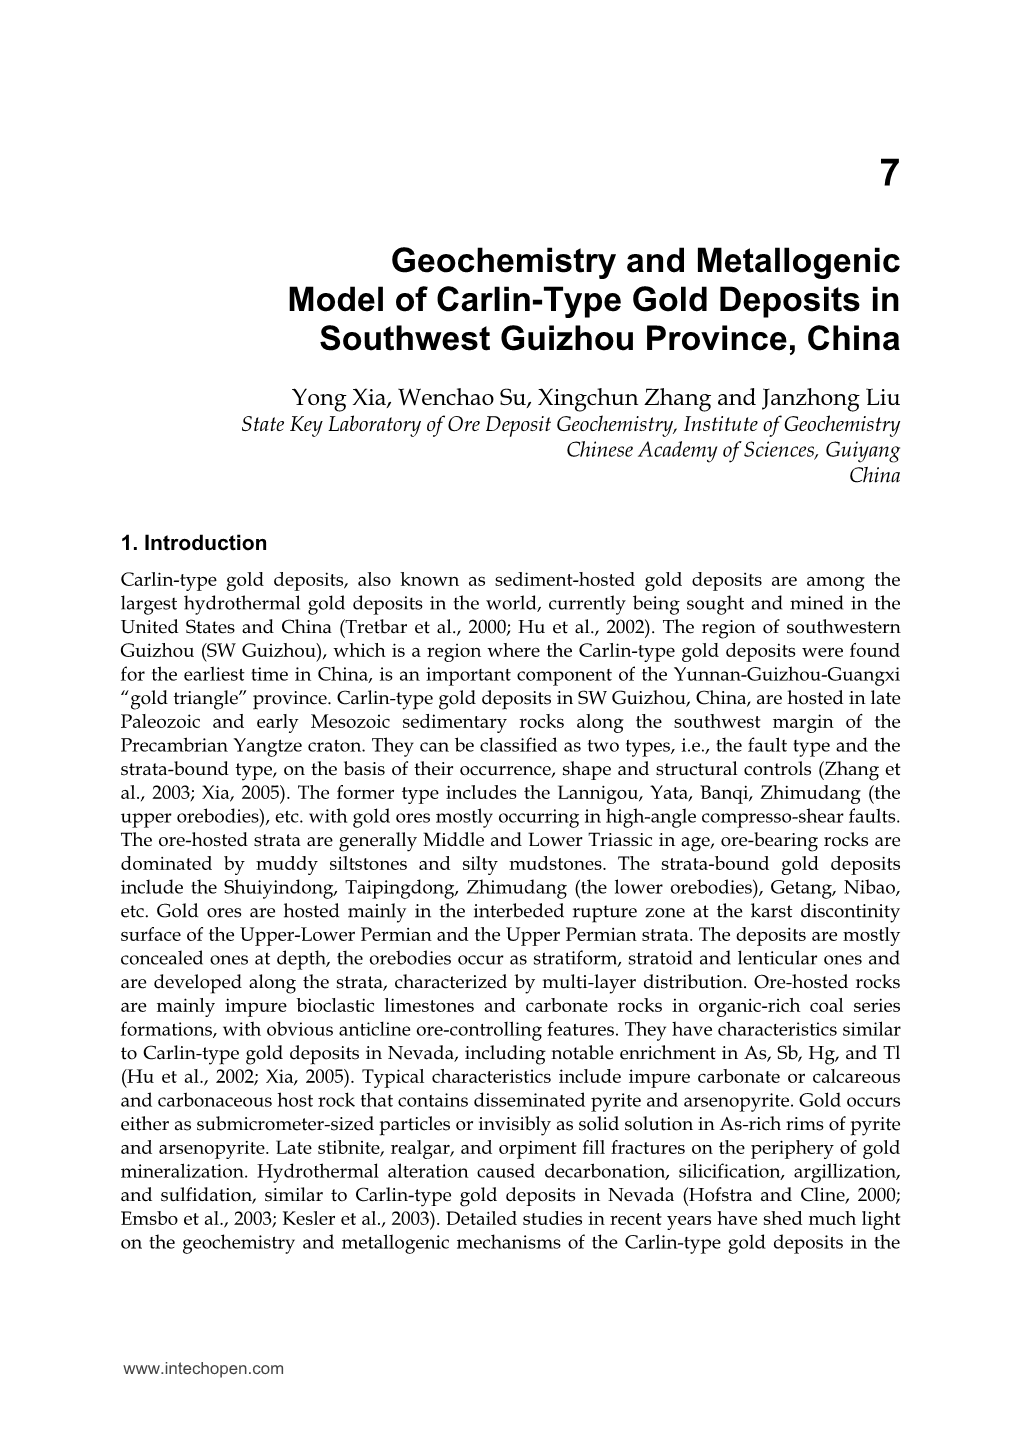 Geochemistry and Metallogenic Model of Carlin-Type Gold Deposits in Southwest Guizhou Province, China